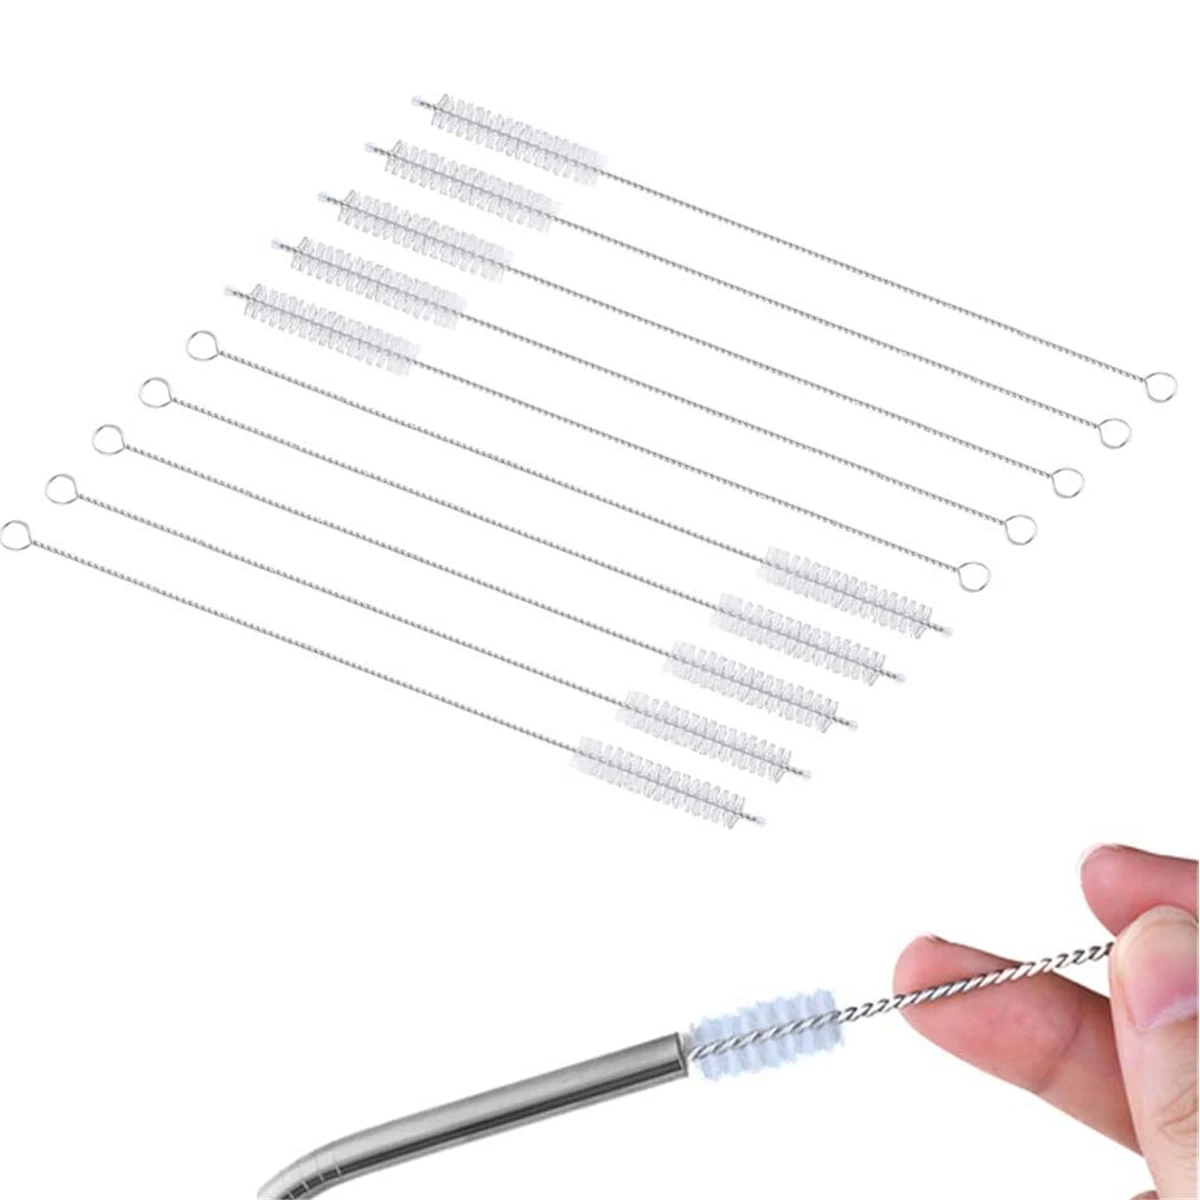 https://ae01.alicdn.com/kf/S46ab3b93a69b43439852a557cfef7bf2m/10-30pcs-Reusable-Straw-Cleaning-Brushes-Eco-Friendly-304-Stainless-Steel-Drinking-Straws-Cleaner-Brush-Soft.jpg